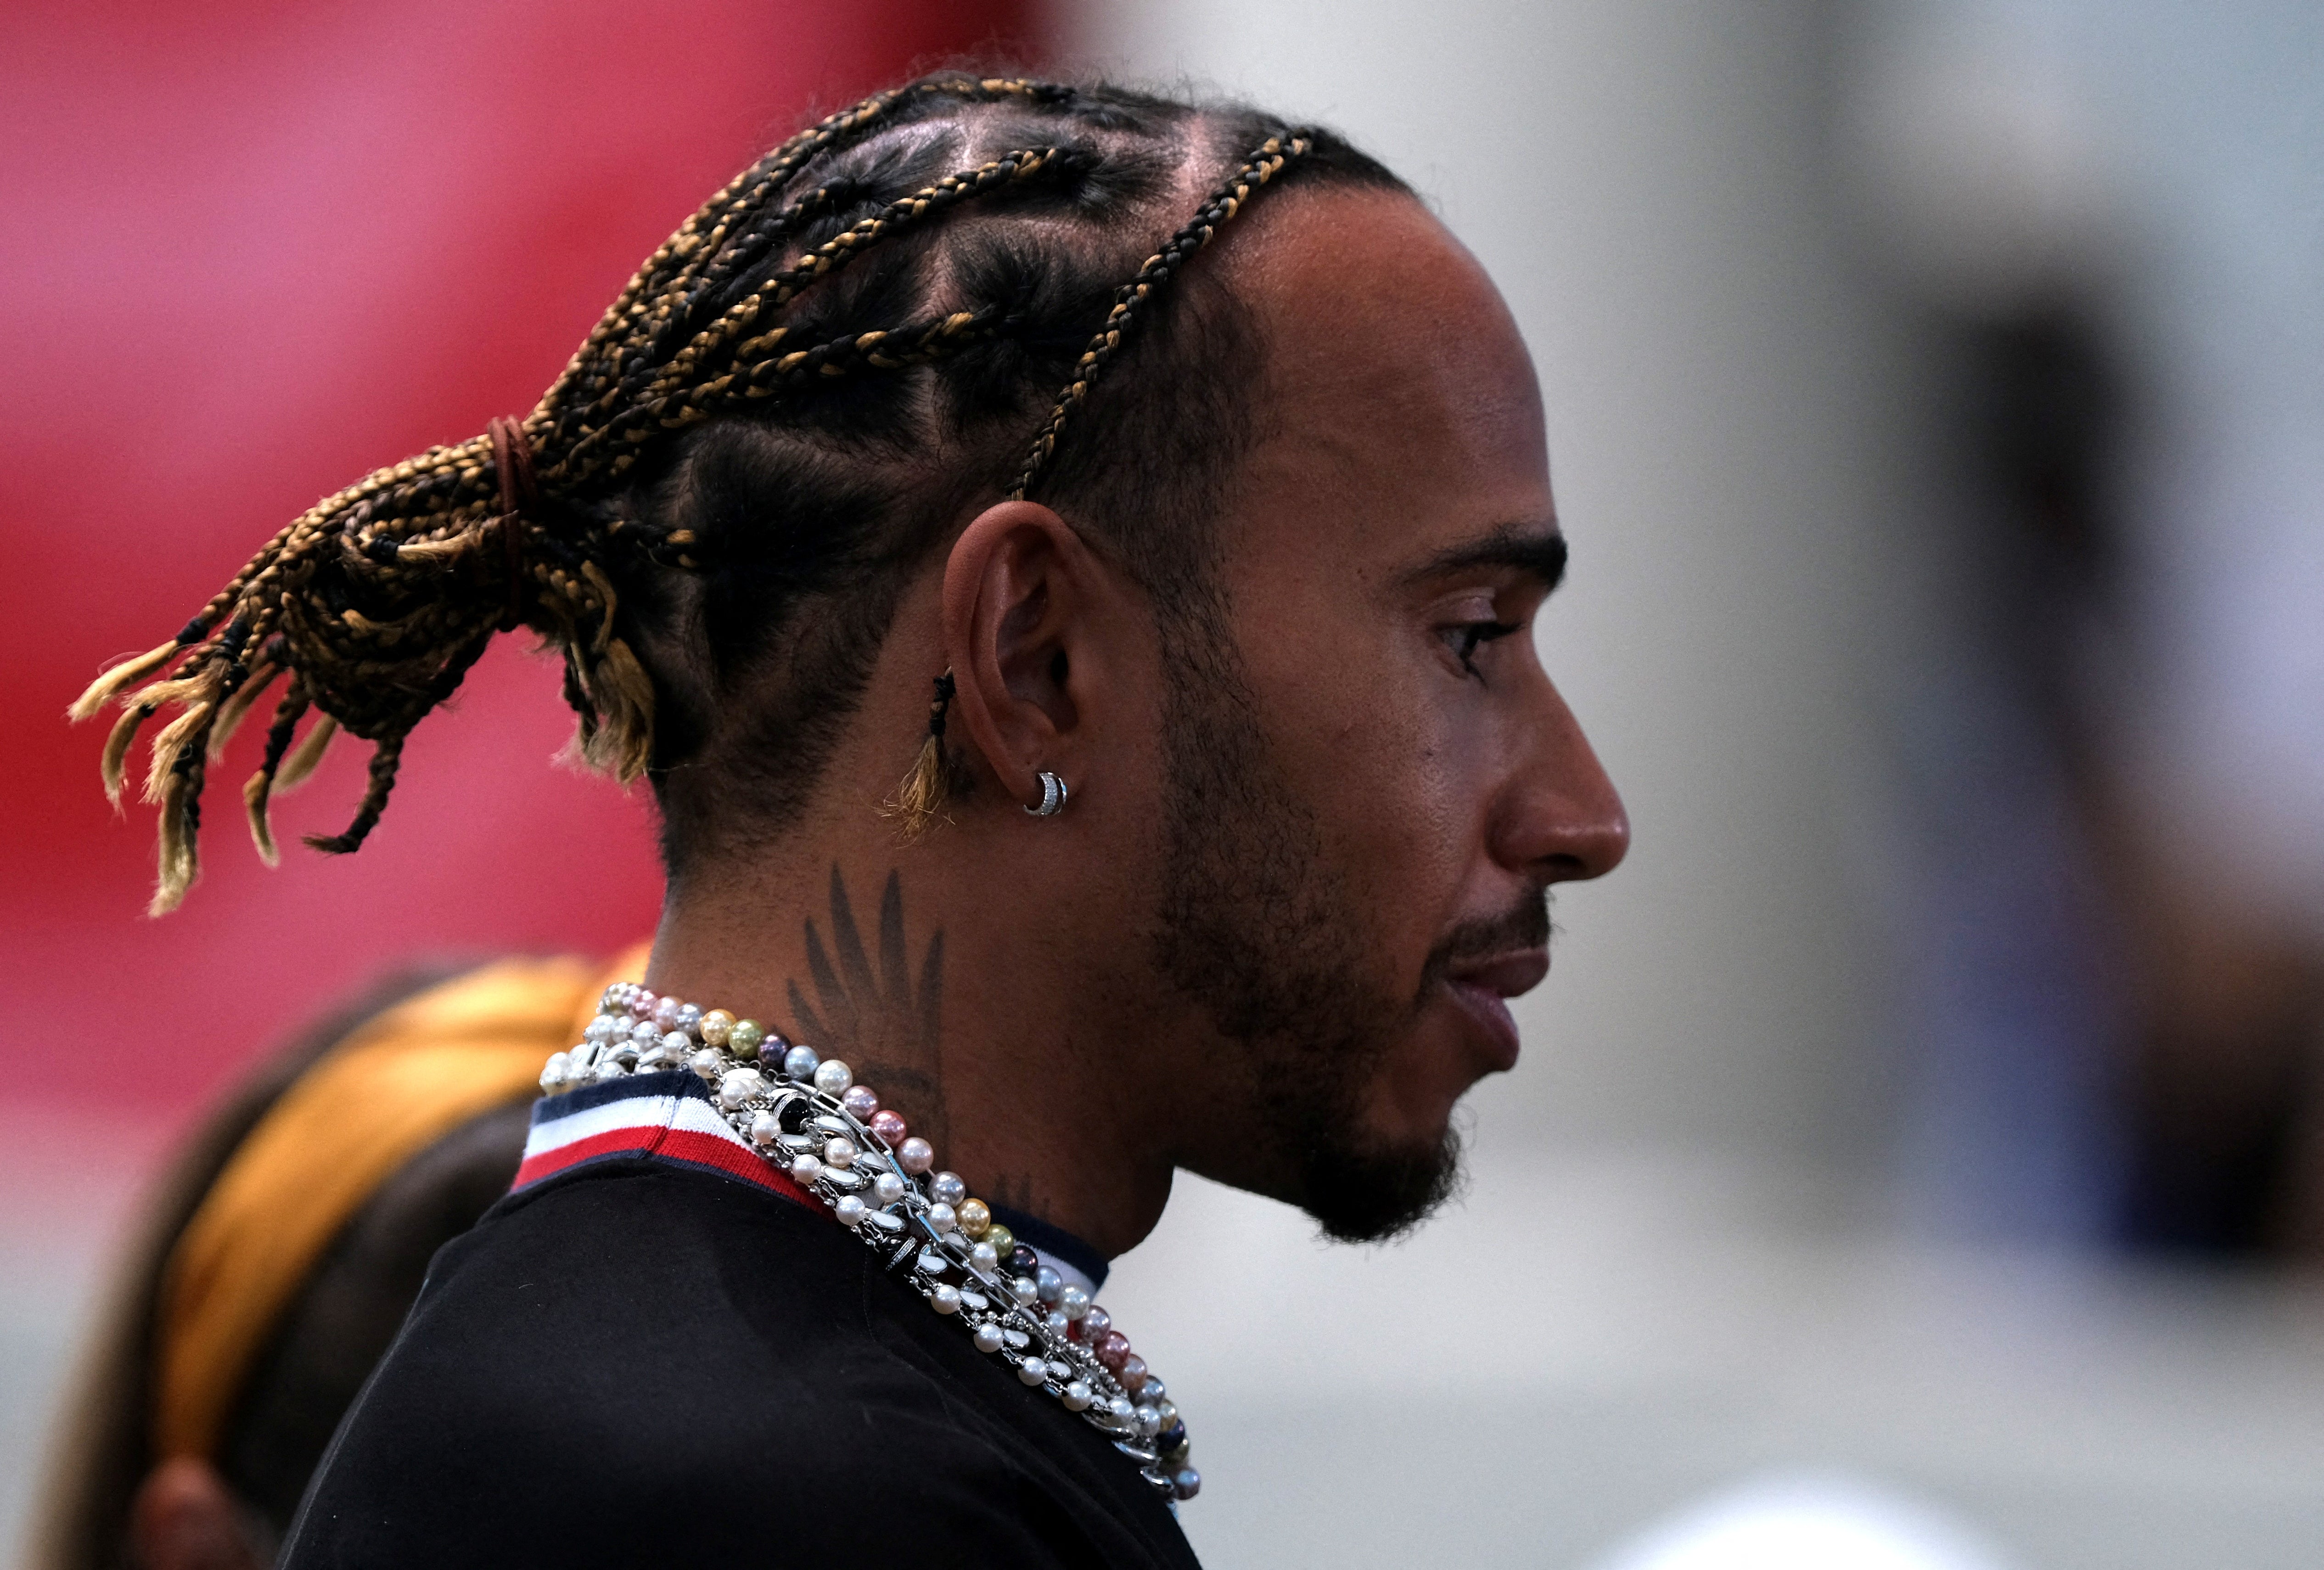 Lewis Hamilton sports a necklace and earings in Miami